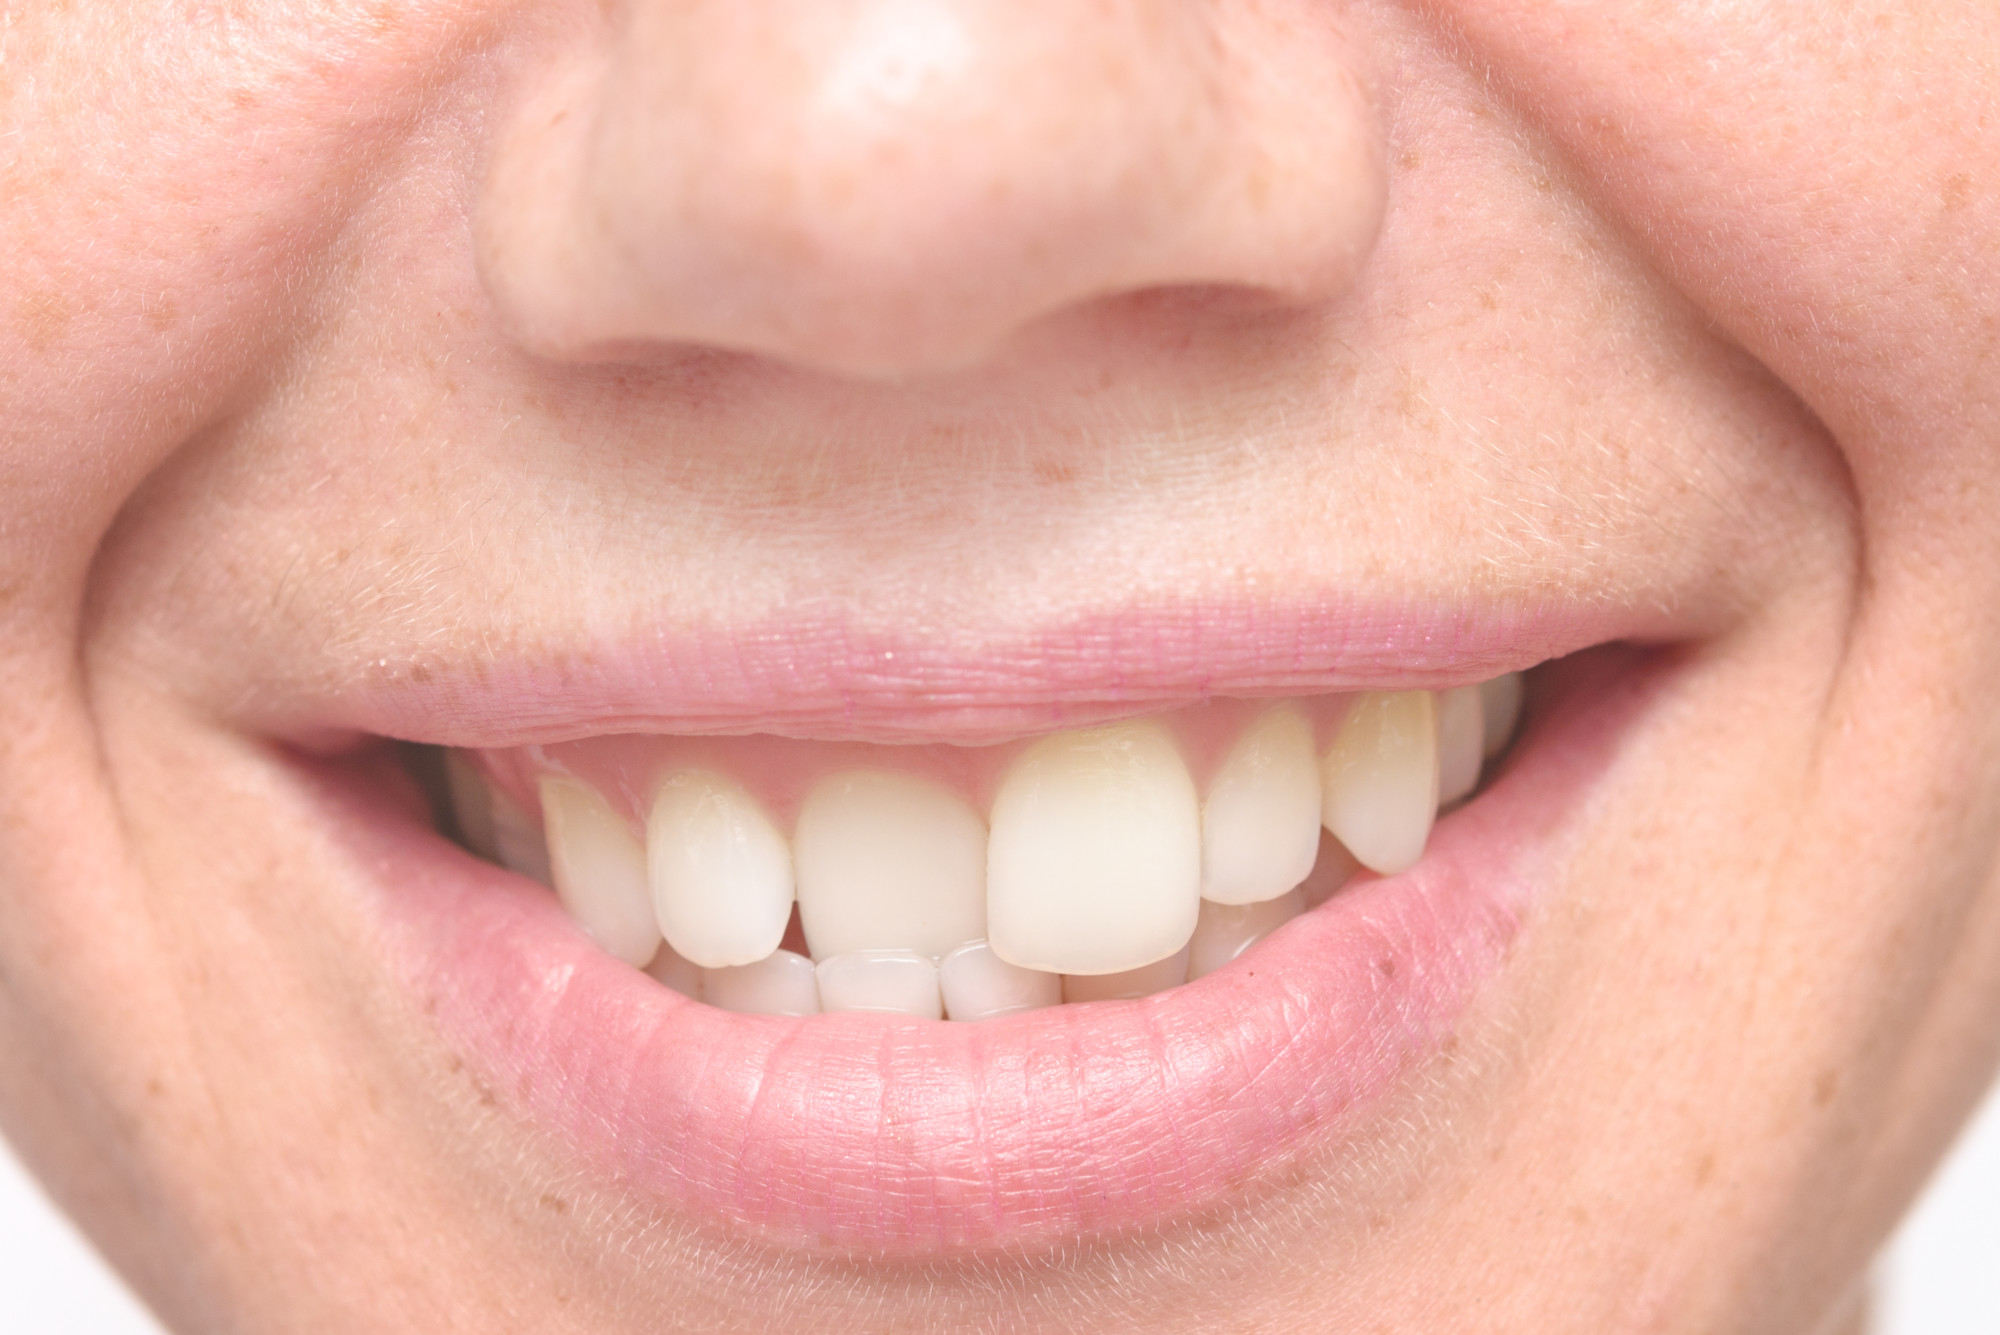 Reasons for Crooked Teeth - How to Straighten Them